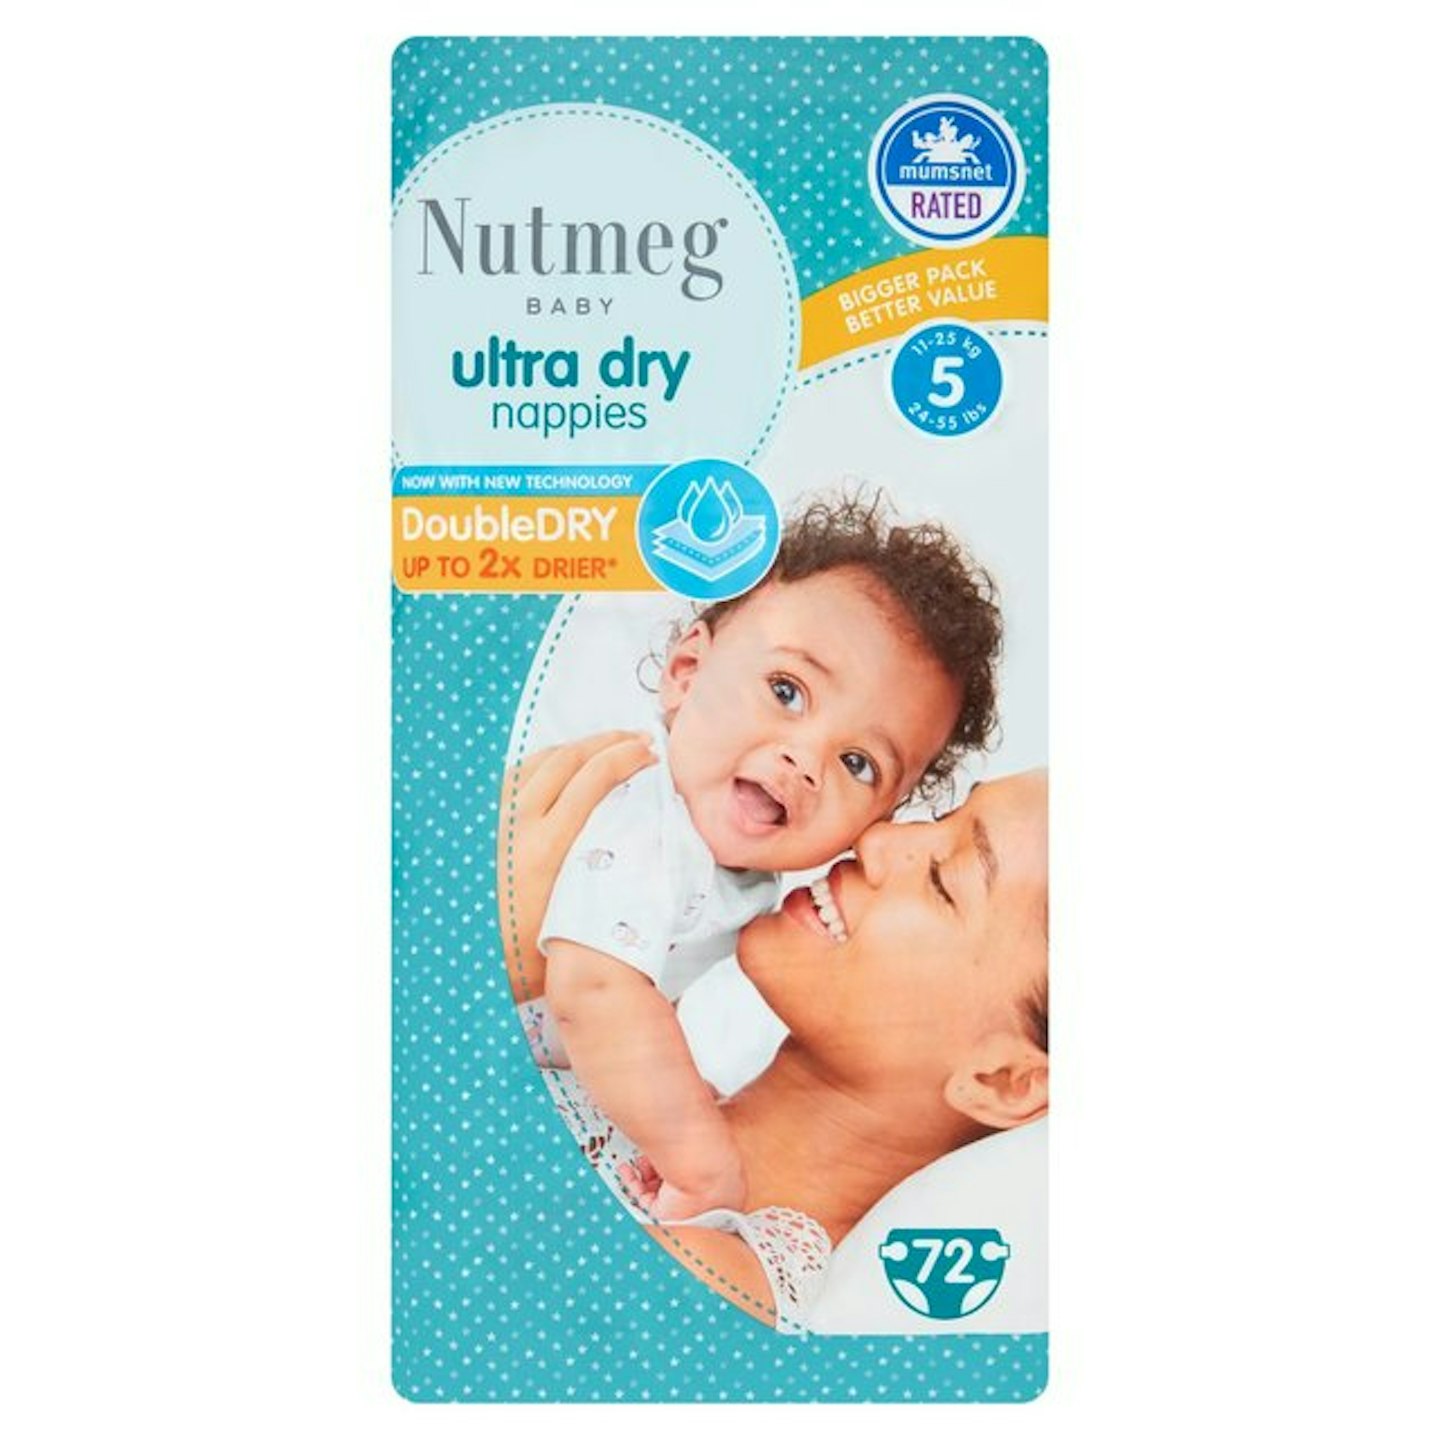 Nutmeg Ultra Dry Nappies Size 5